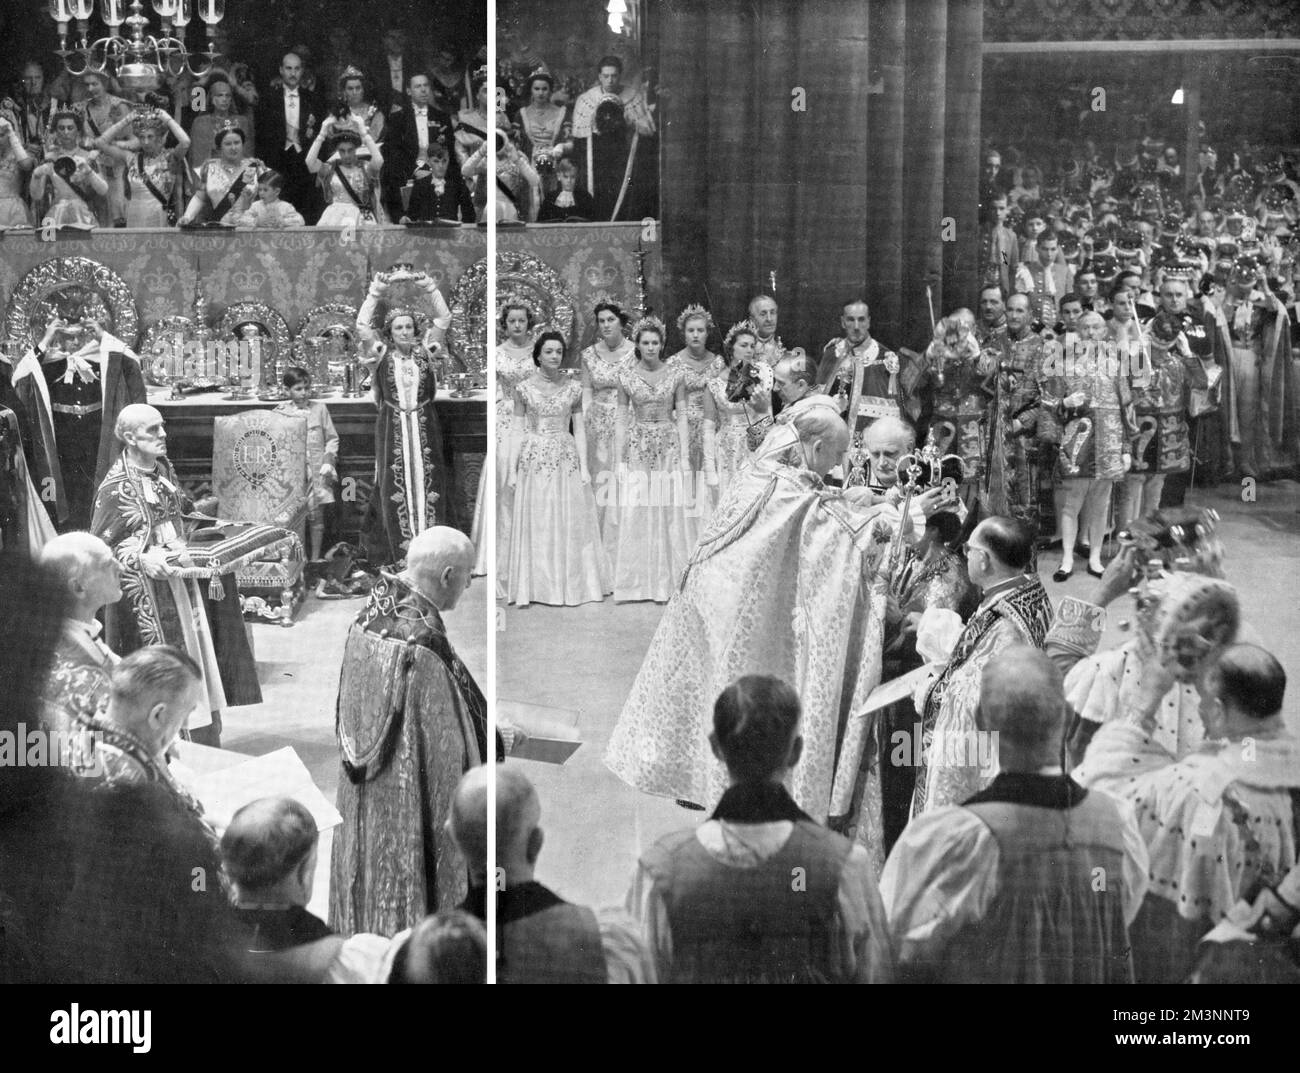 The supreme moment during the Coronation of Queen Elizabeth II where St. Edward's Crown is placed on the Queen's head by the Archbishop of Canterbury, the people shout, 'God Save the Queen' and the Princes and Princesses, Peers and Peeresses simultaneously put on their coronets and caps.       Date: 1953 Stock Photo